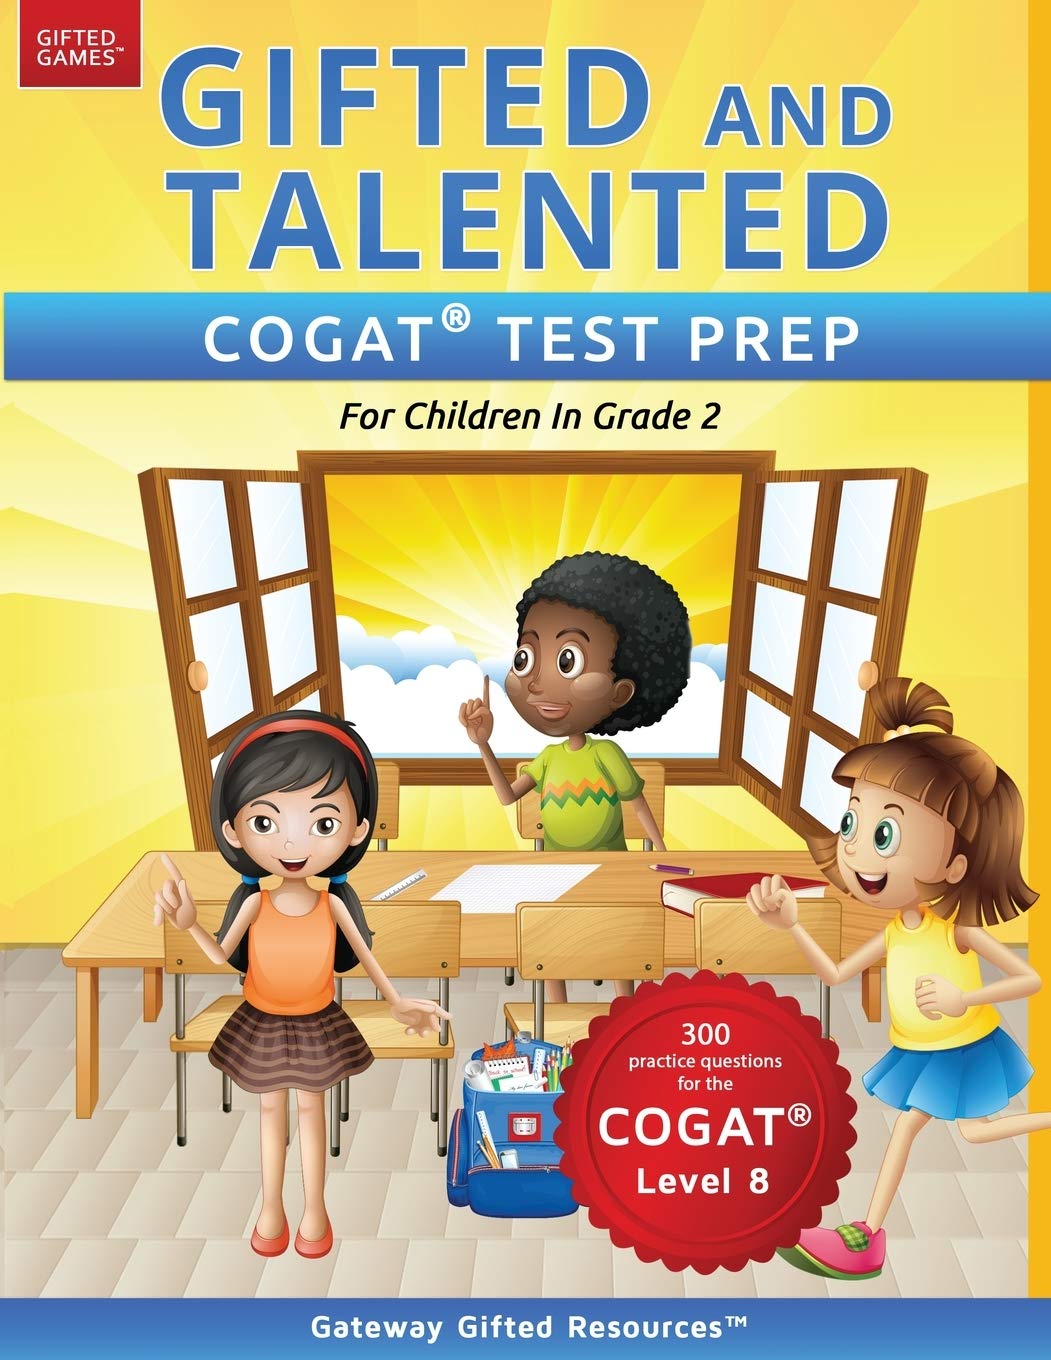 Gifted and Talented COGAT Test Prep Grade 2: Gifted Test Prep Book for the COGAT Level 8; Workbook for Children in Grade 2 by Resources, Gateway Gifted